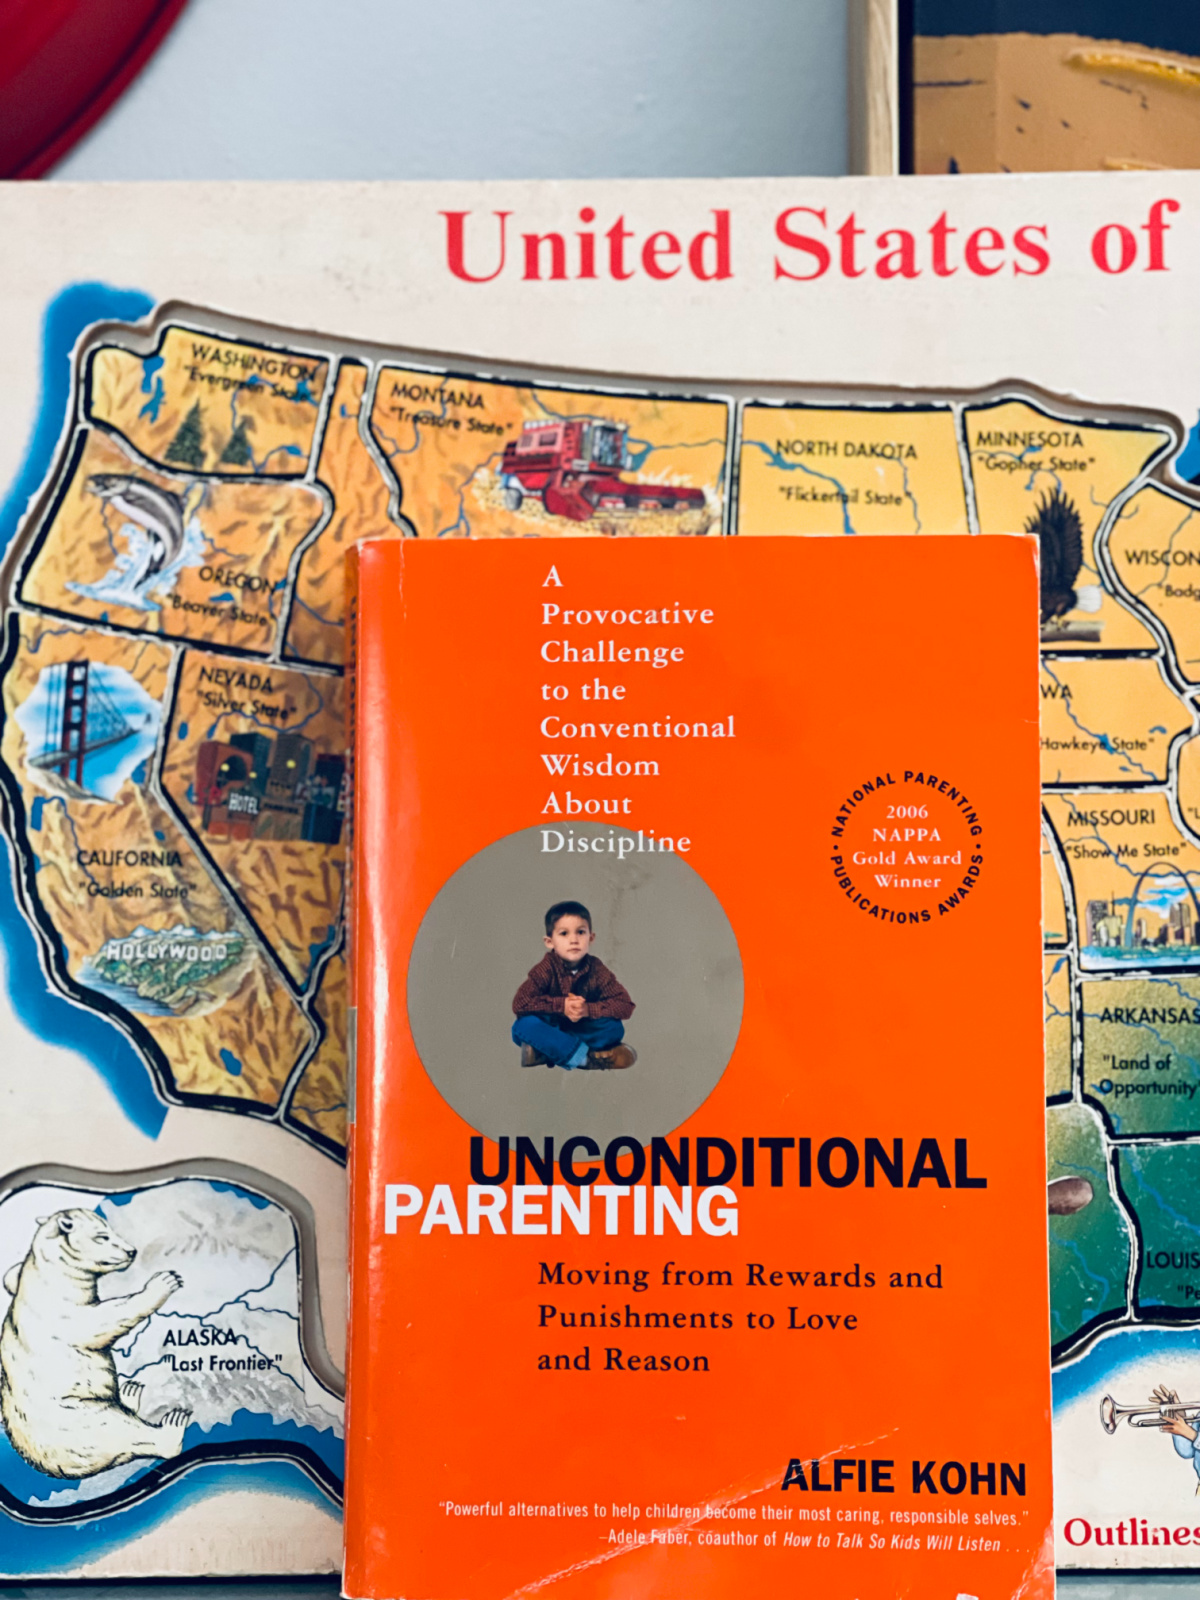 Unconditional Parenting book by Alfie Kohn in front of United States puzzle.